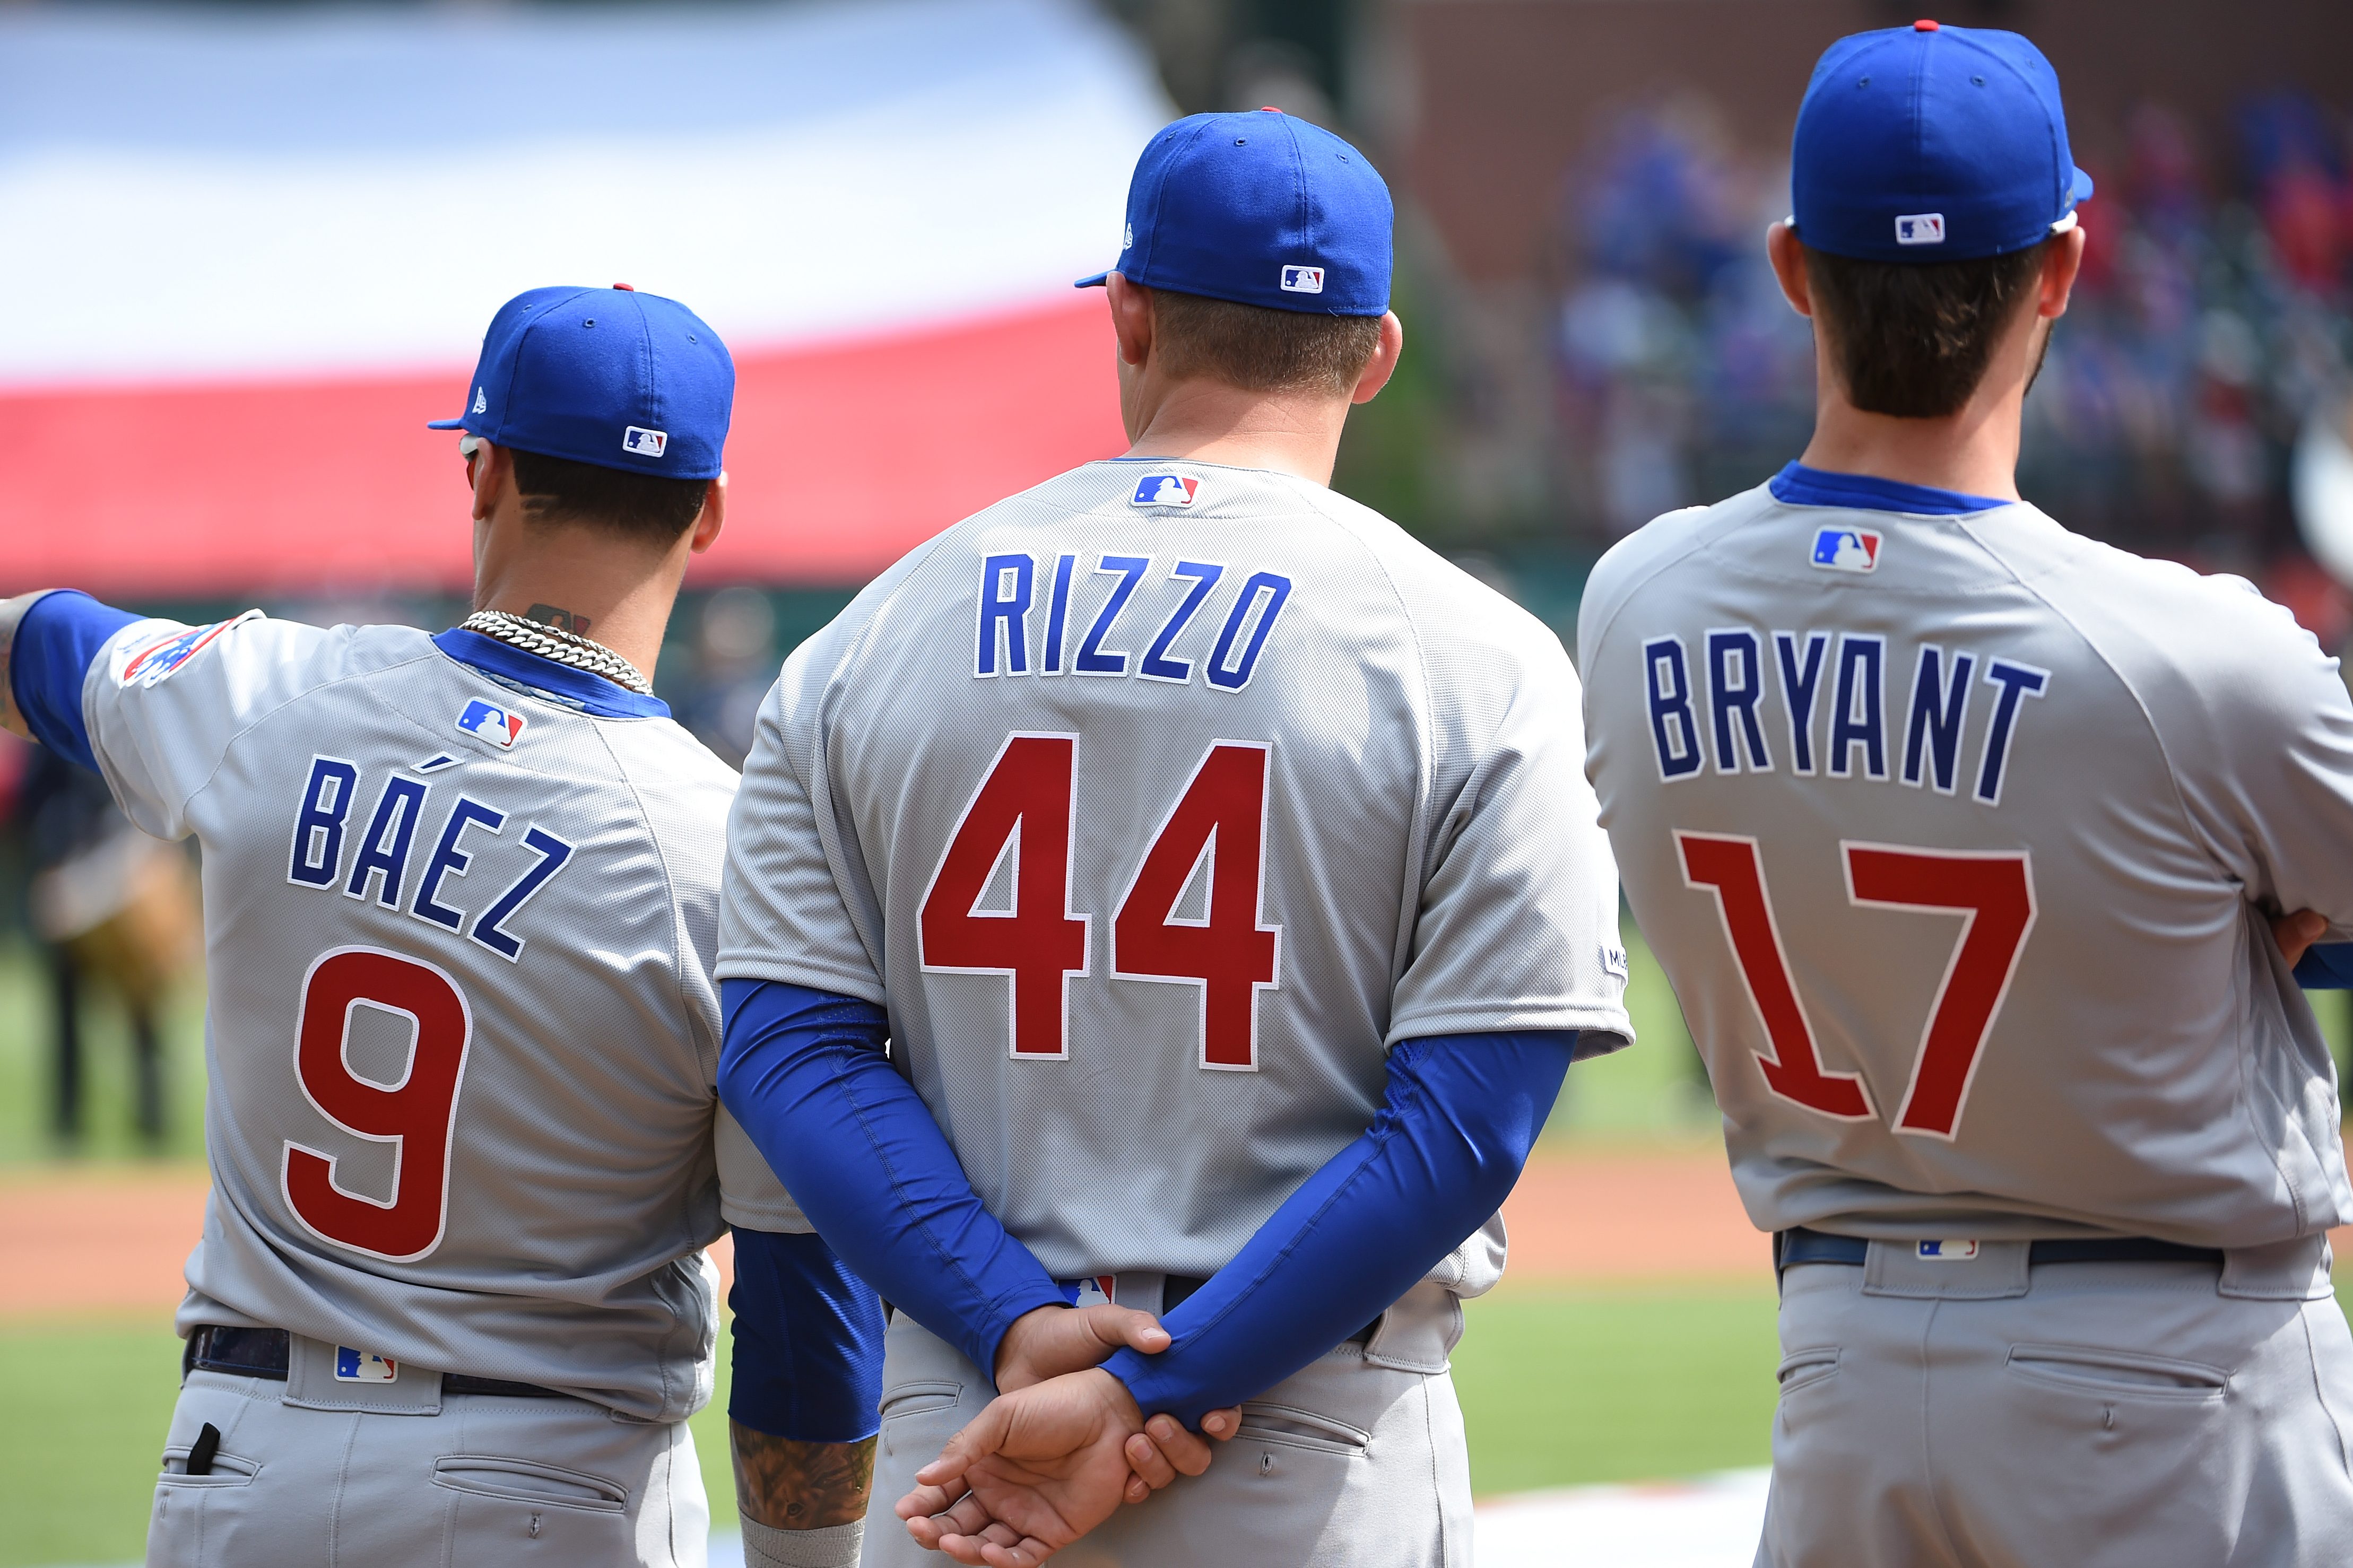 Bryant, Rizzo Own Two of MLB's Best Selling Jerseys – NBC Chicago